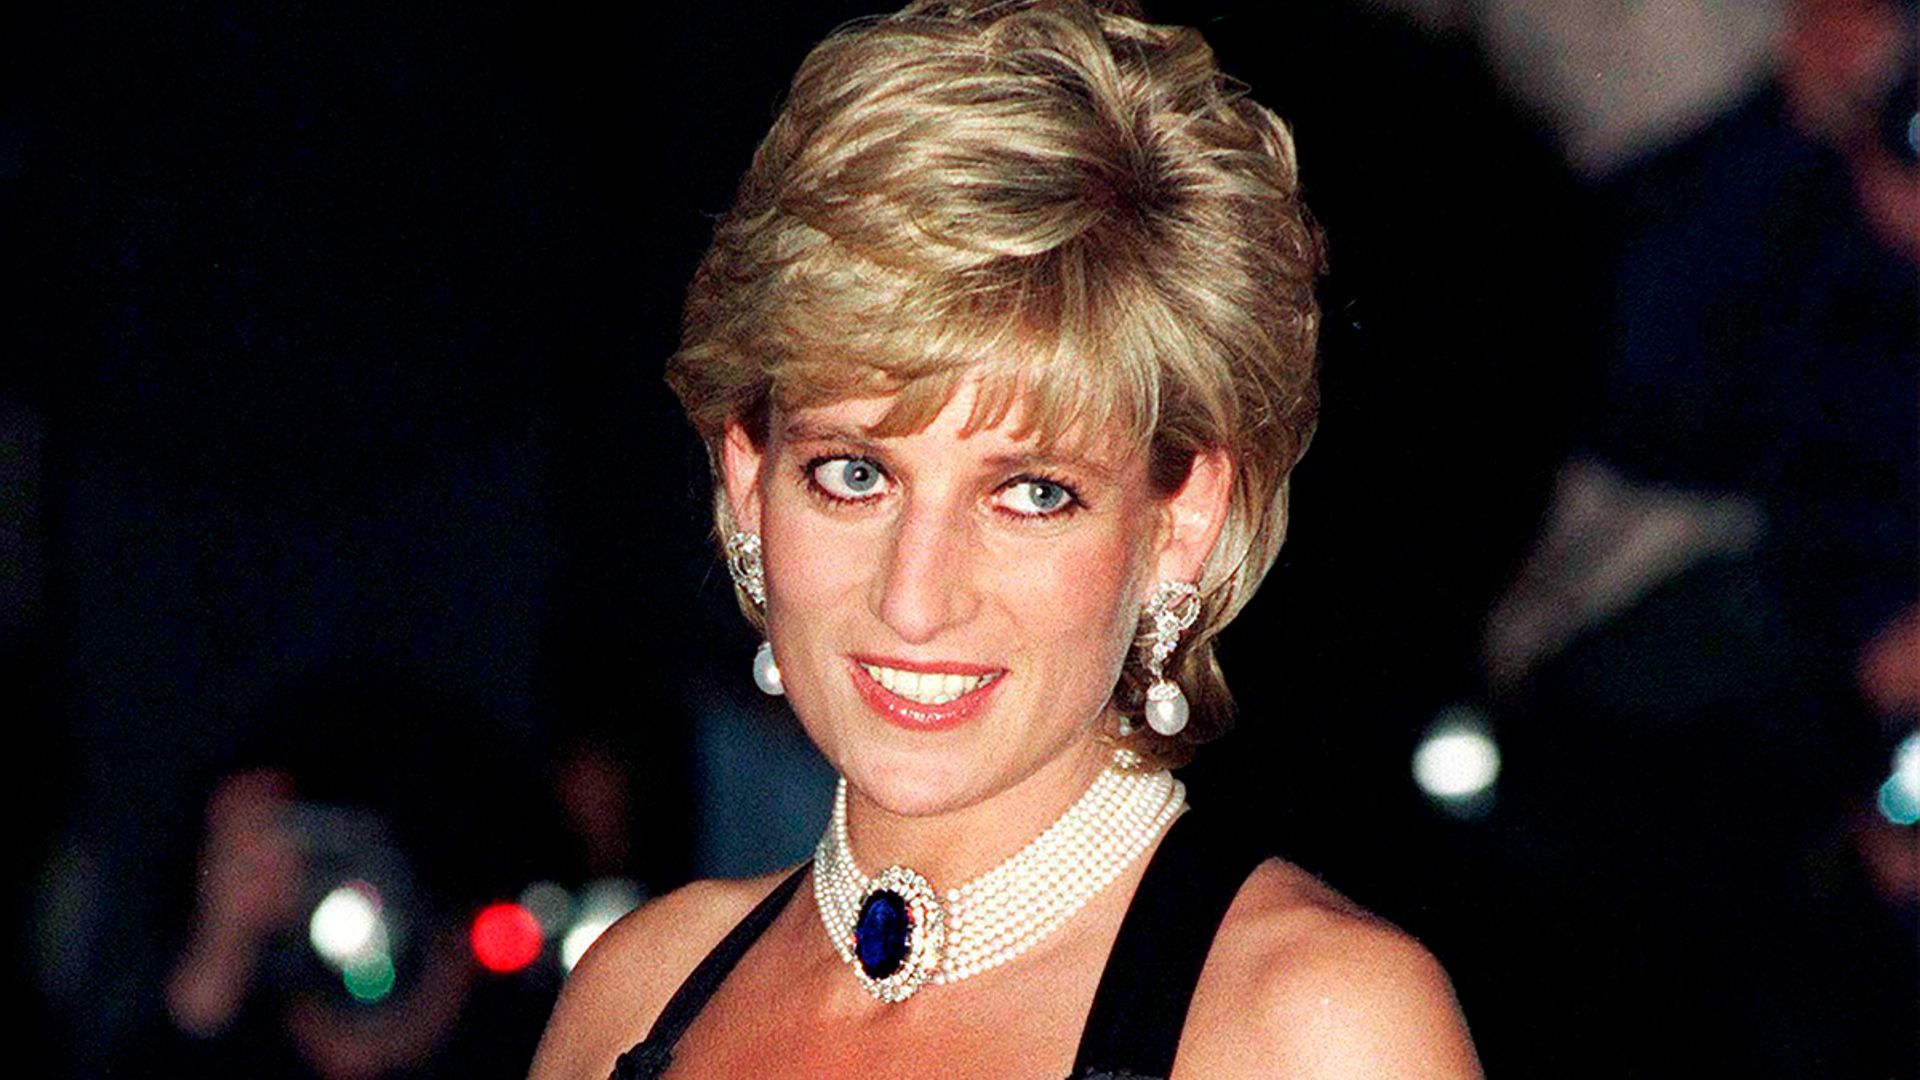 Princess Diana's famous dress sells for nearly £500k at auction